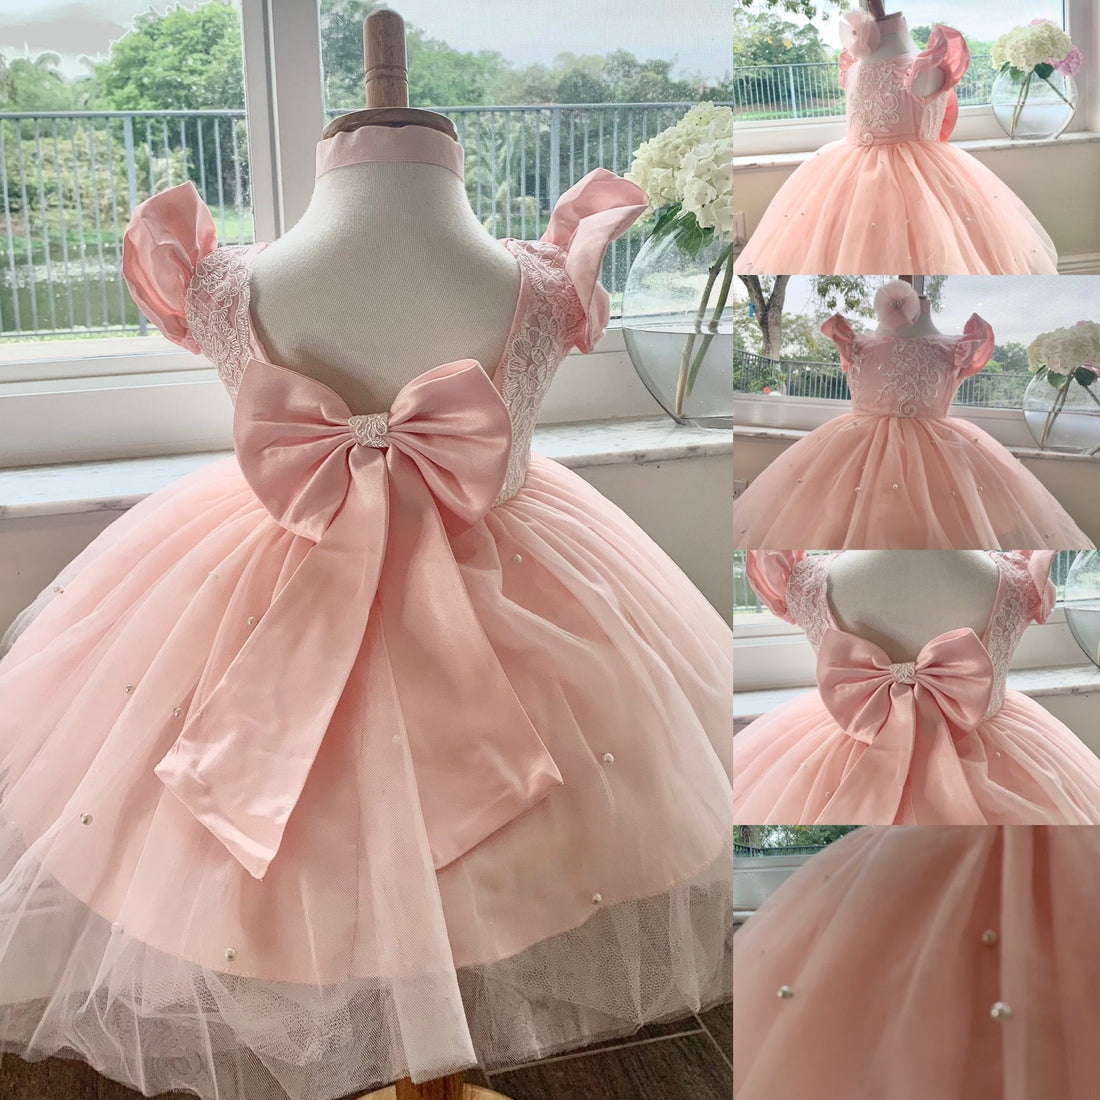 Selecting the best dress option for your baby girl - TinySweetPeaBoutique